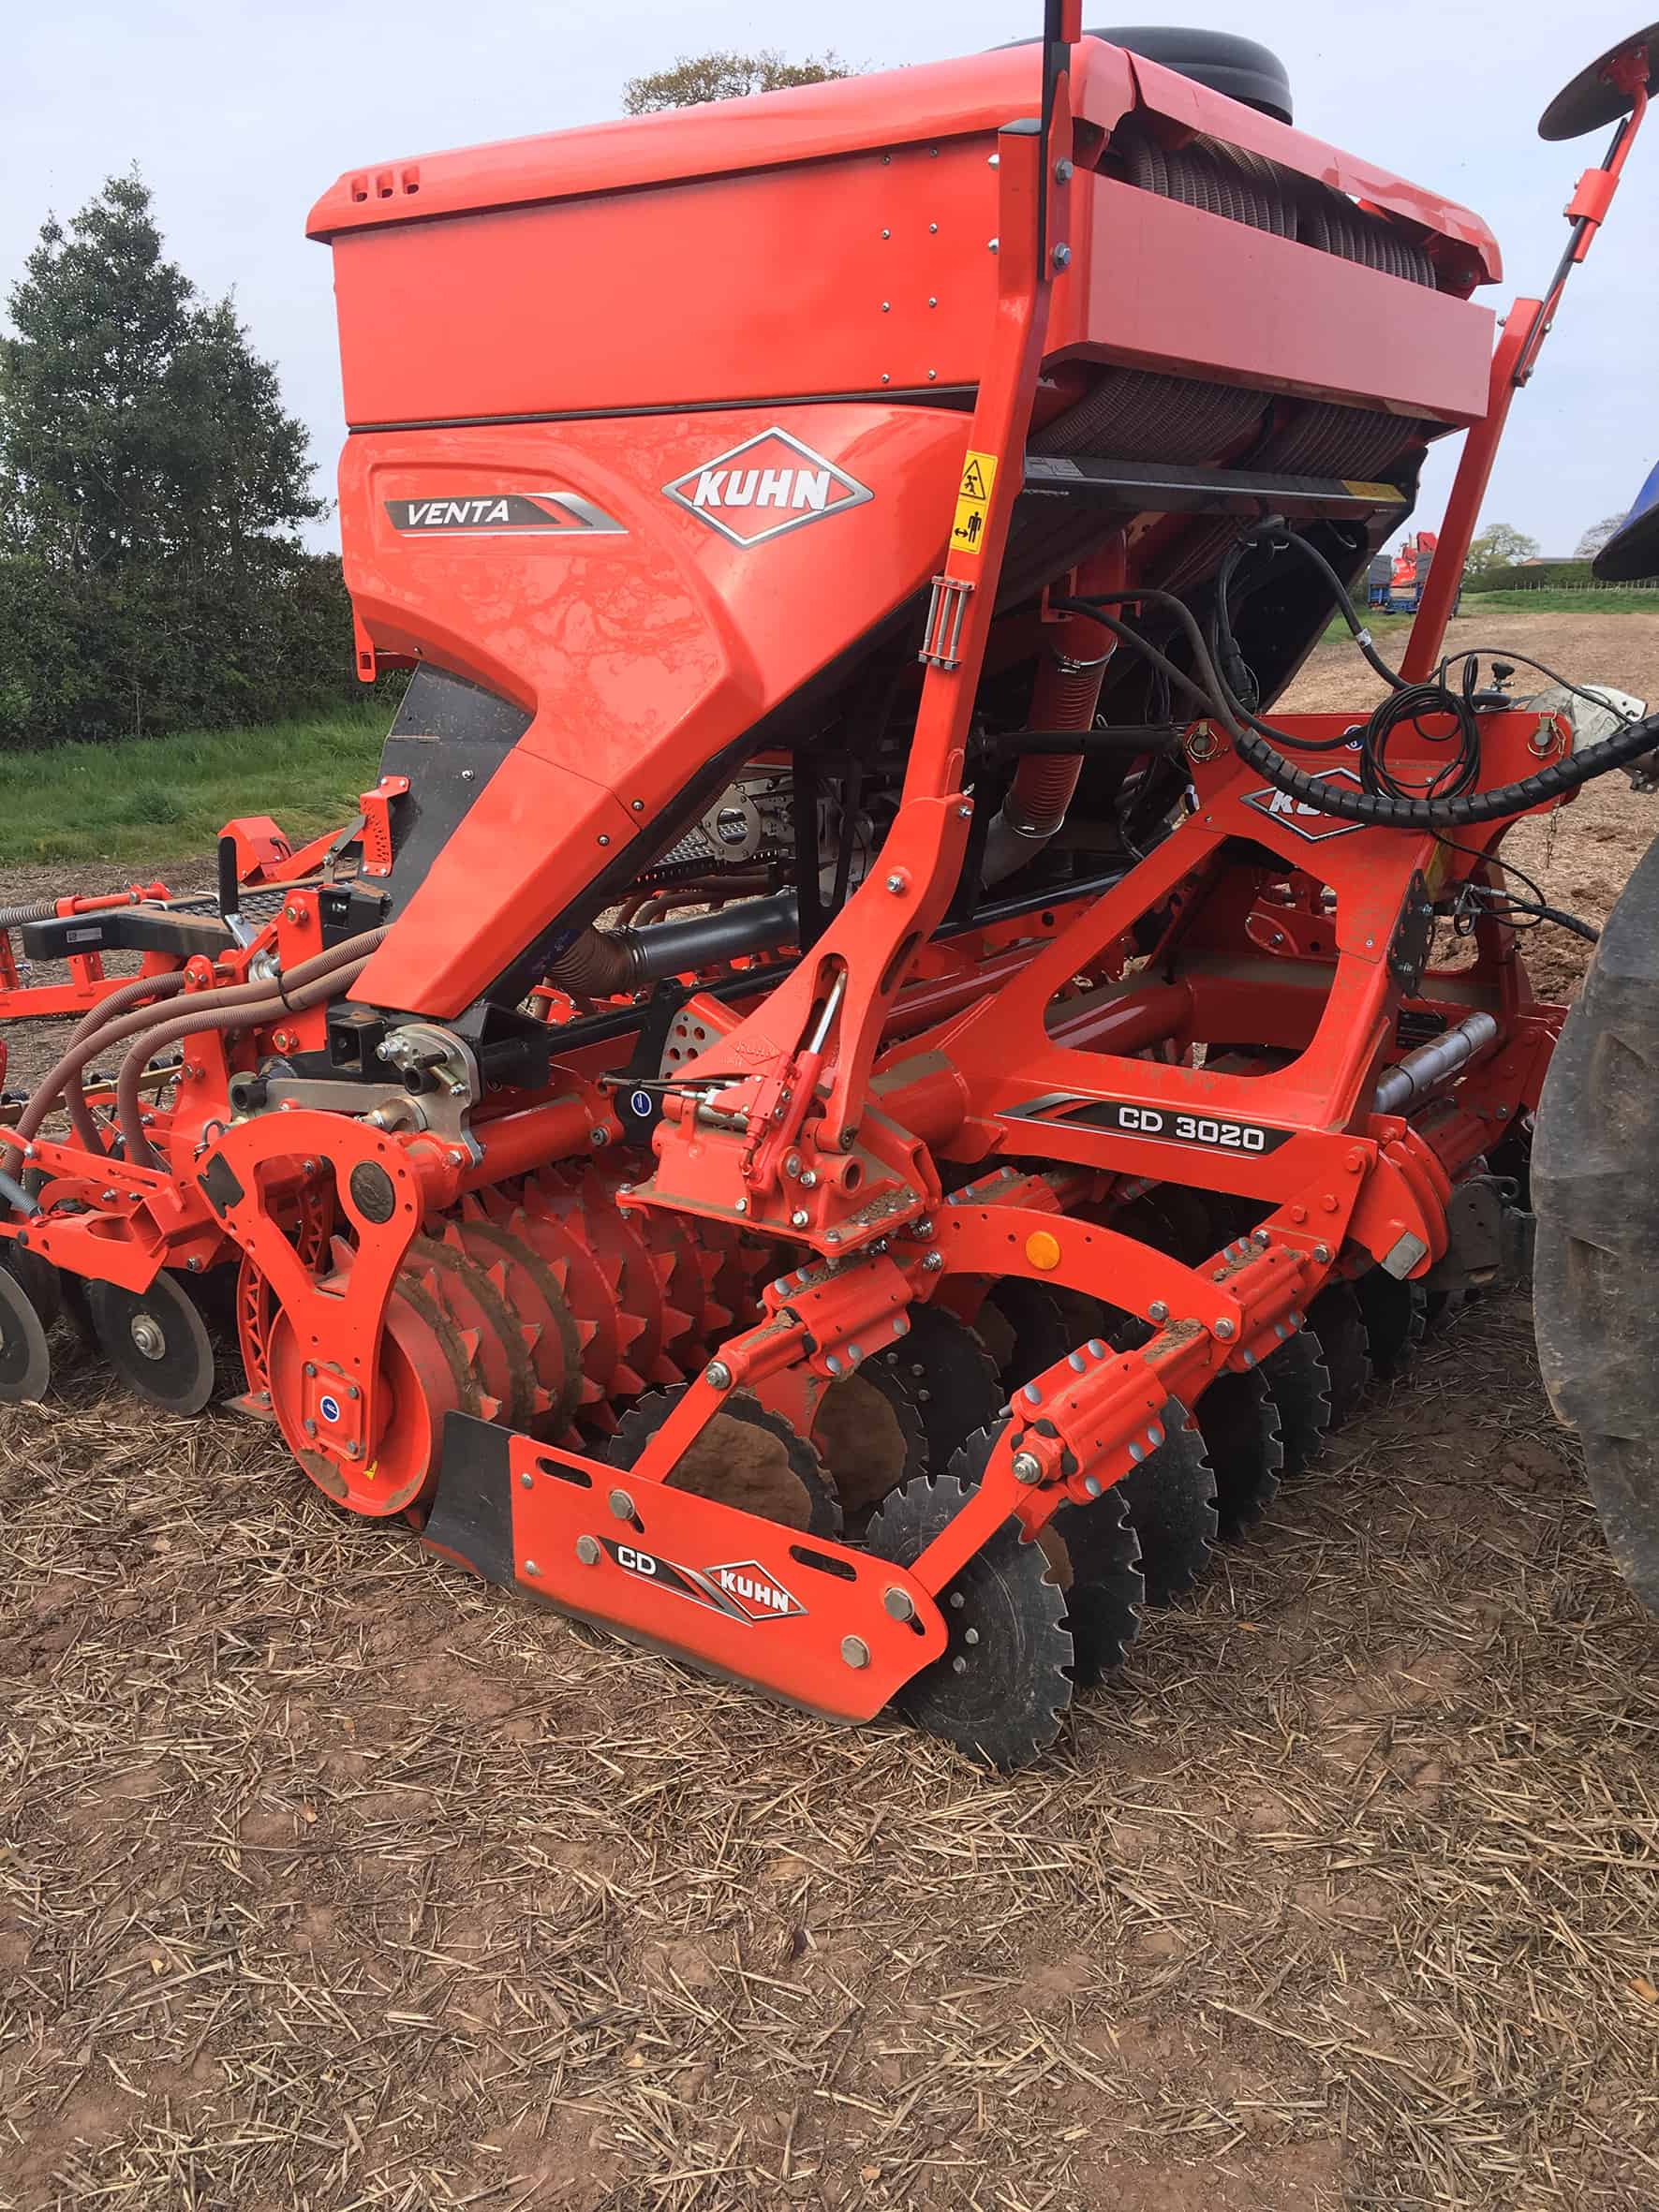 Quick fit disc cultivator boosts drilling flexibility